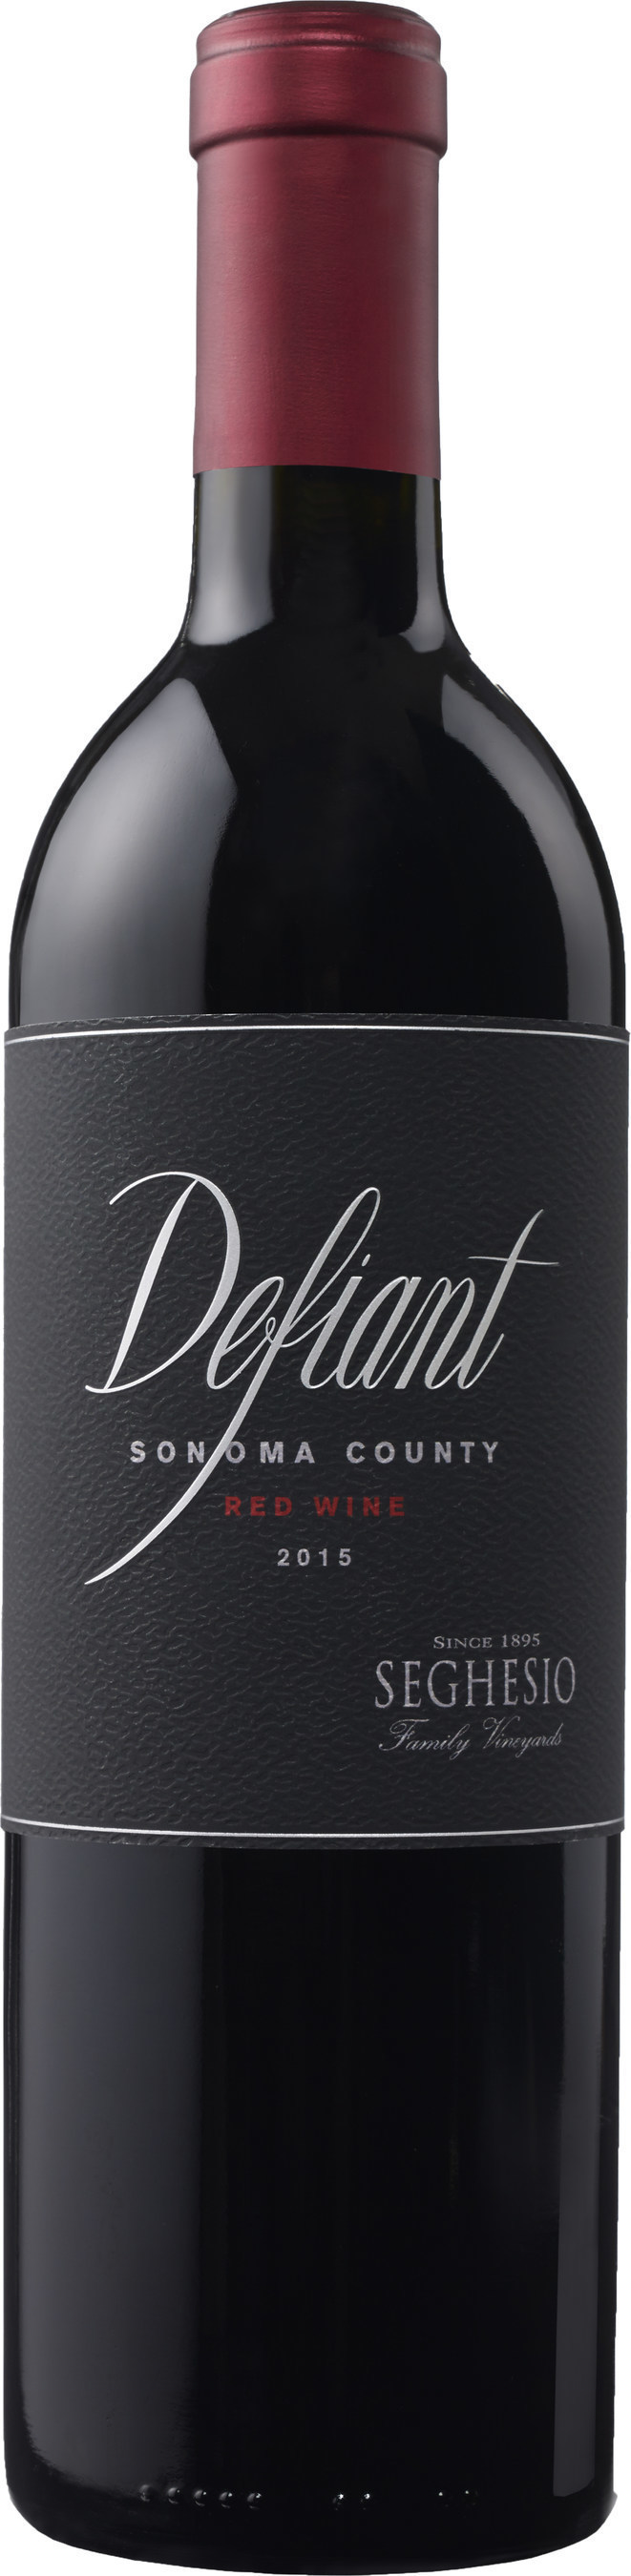 Defiant: A New Zinfandel-Based Red Blend by Seghesio Family Vineyards